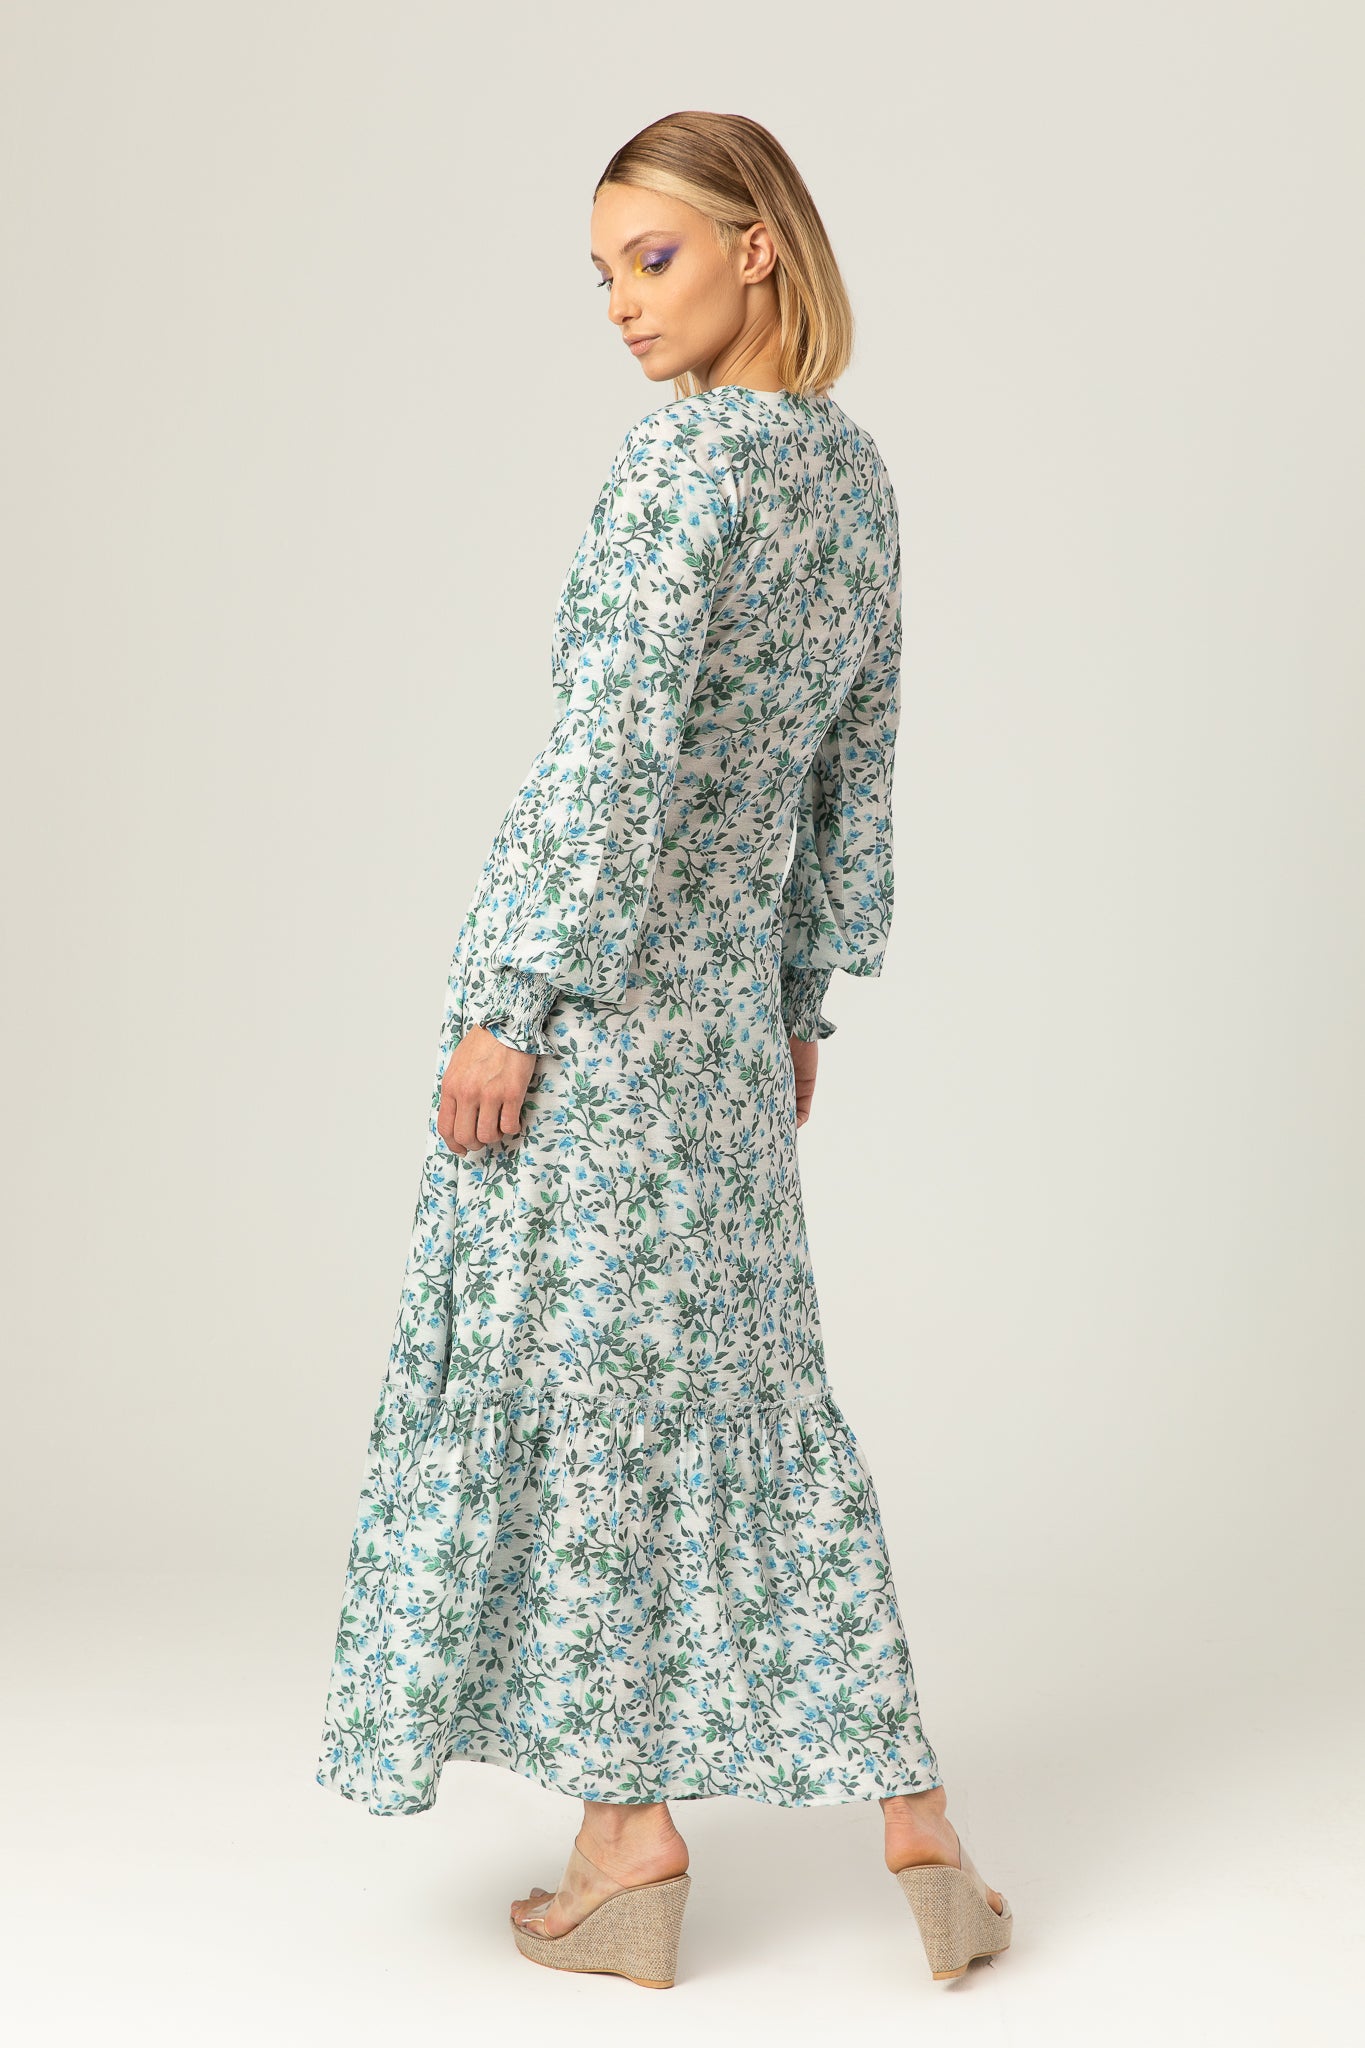 The Flower Maxi